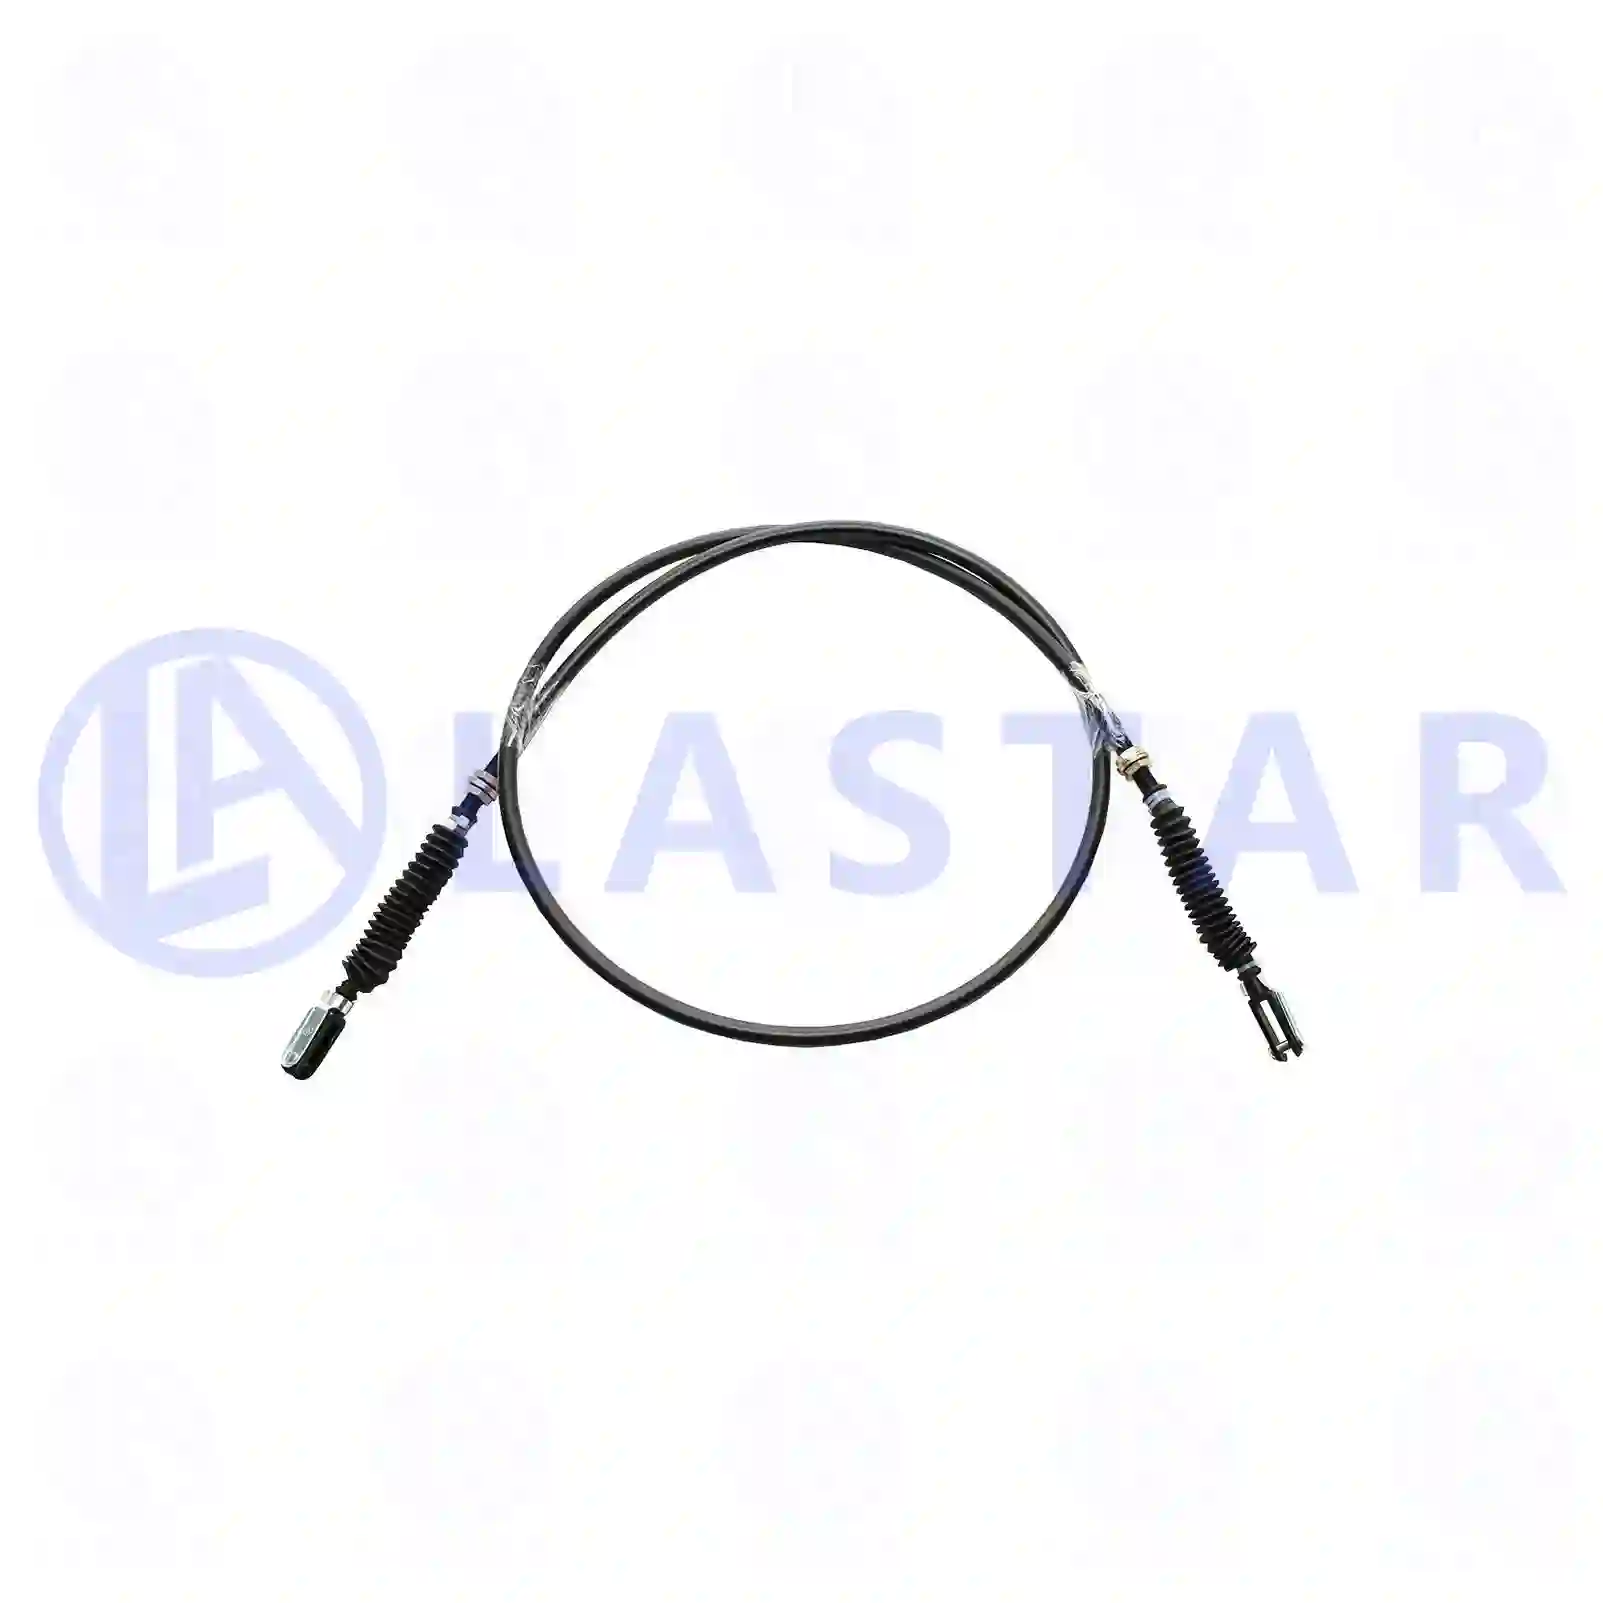 Throttle cable, 77704517, 1356941, 1414372 ||  77704517 Lastar Spare Part | Truck Spare Parts, Auotomotive Spare Parts Throttle cable, 77704517, 1356941, 1414372 ||  77704517 Lastar Spare Part | Truck Spare Parts, Auotomotive Spare Parts